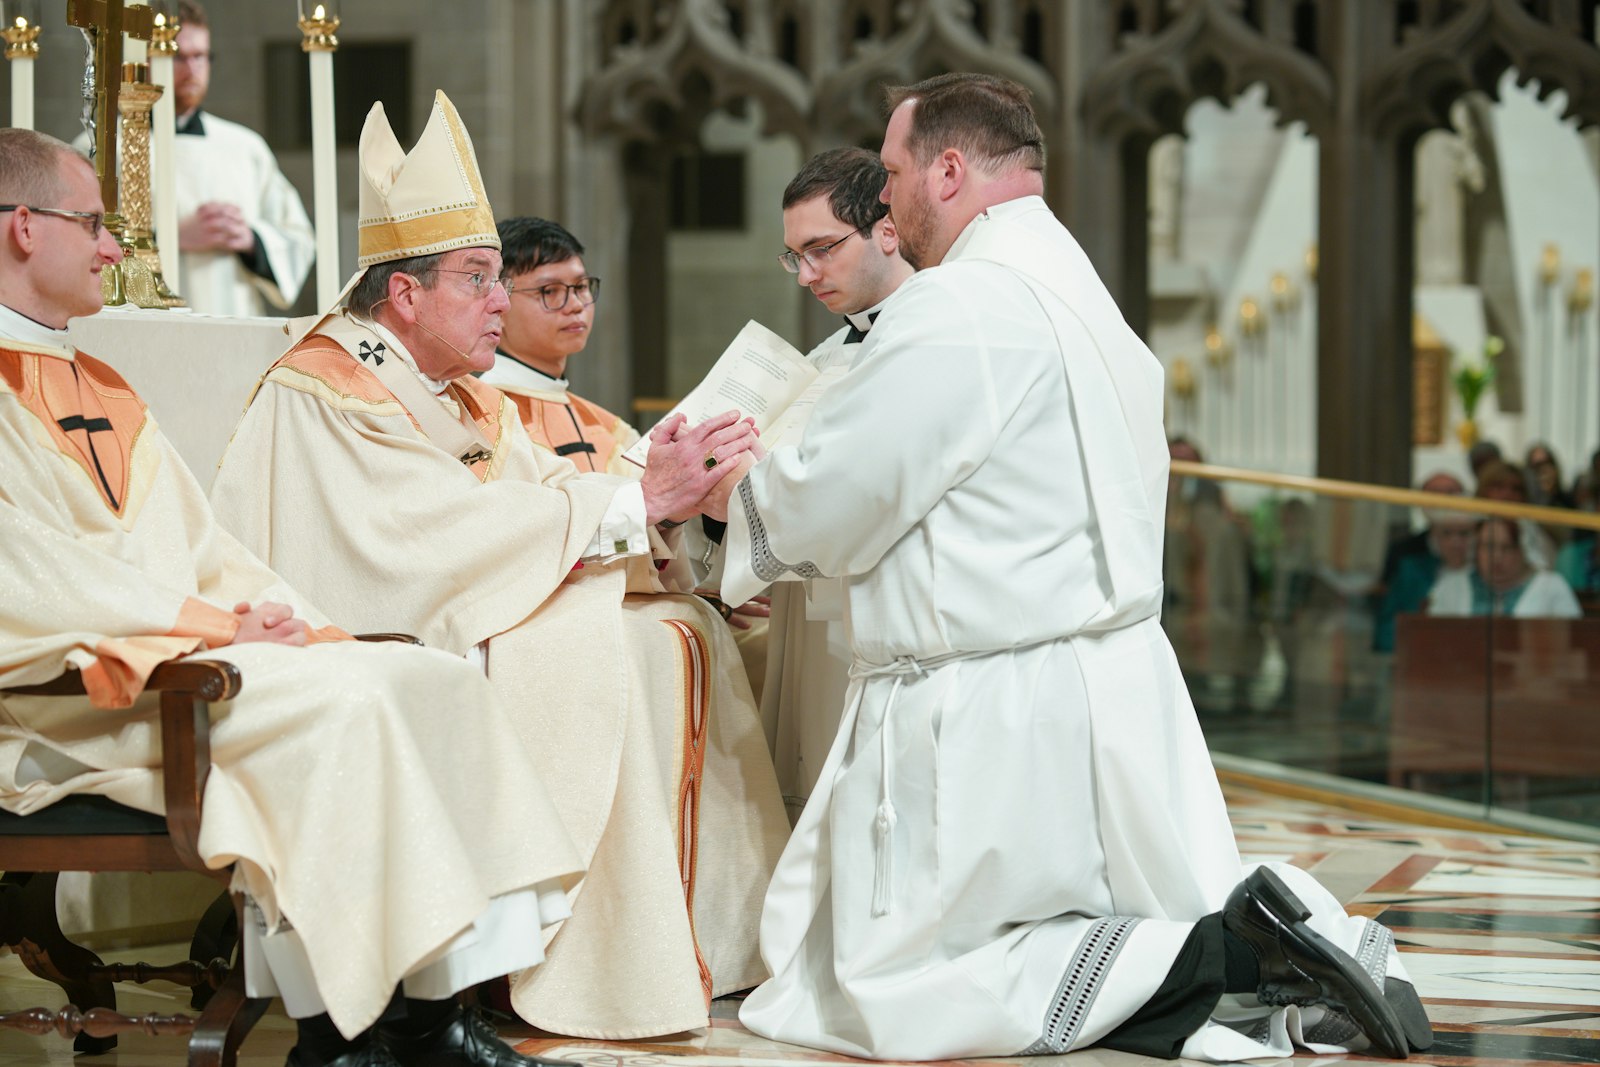 Fr. Andrew Smith kneels before Archbishop Allen H. Vigneron and gives his Promise of Obedience during the Rite of Ordination to the Priesthood on May 27 at the Cathedral of the Most Blessed Sacrament.